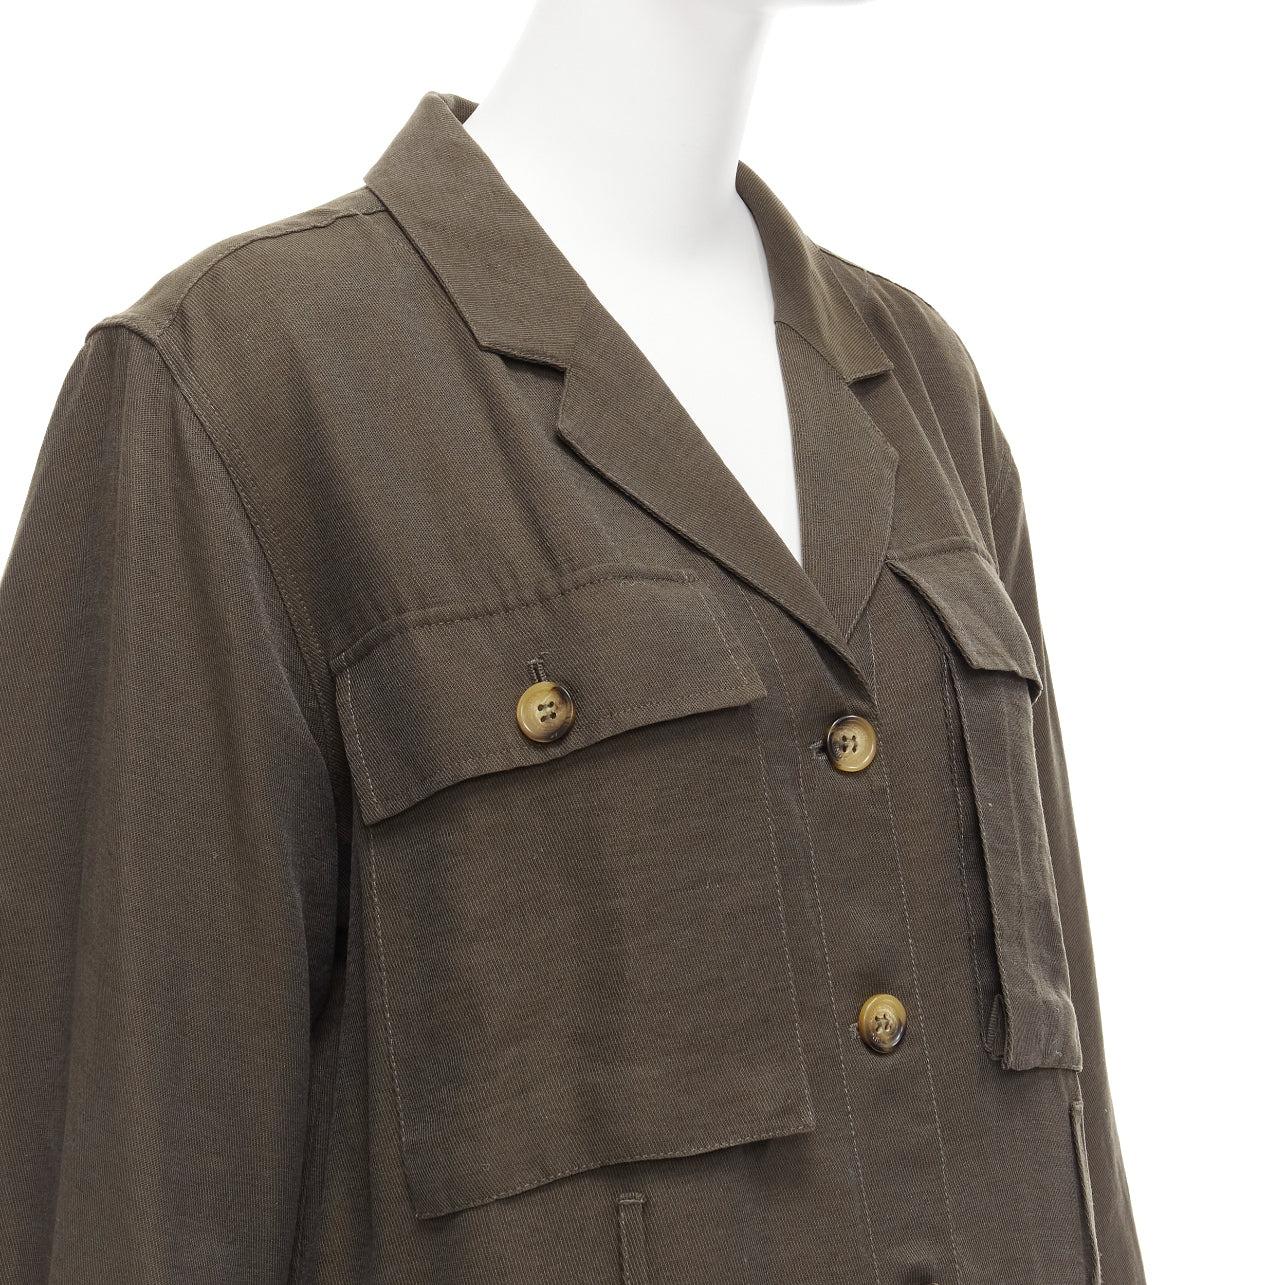 ANINE BING Kaiden Willow dark green pocketed safari shirt dress
Reference: JACG/A00127
Brand: Anine Bing
Model: Kaiden
Material: Tencel, Blend
Color: Green, Brown
Pattern: Solid
Closure: Button
Made in: Turkey

CONDITION:
Condition: Excellent, this